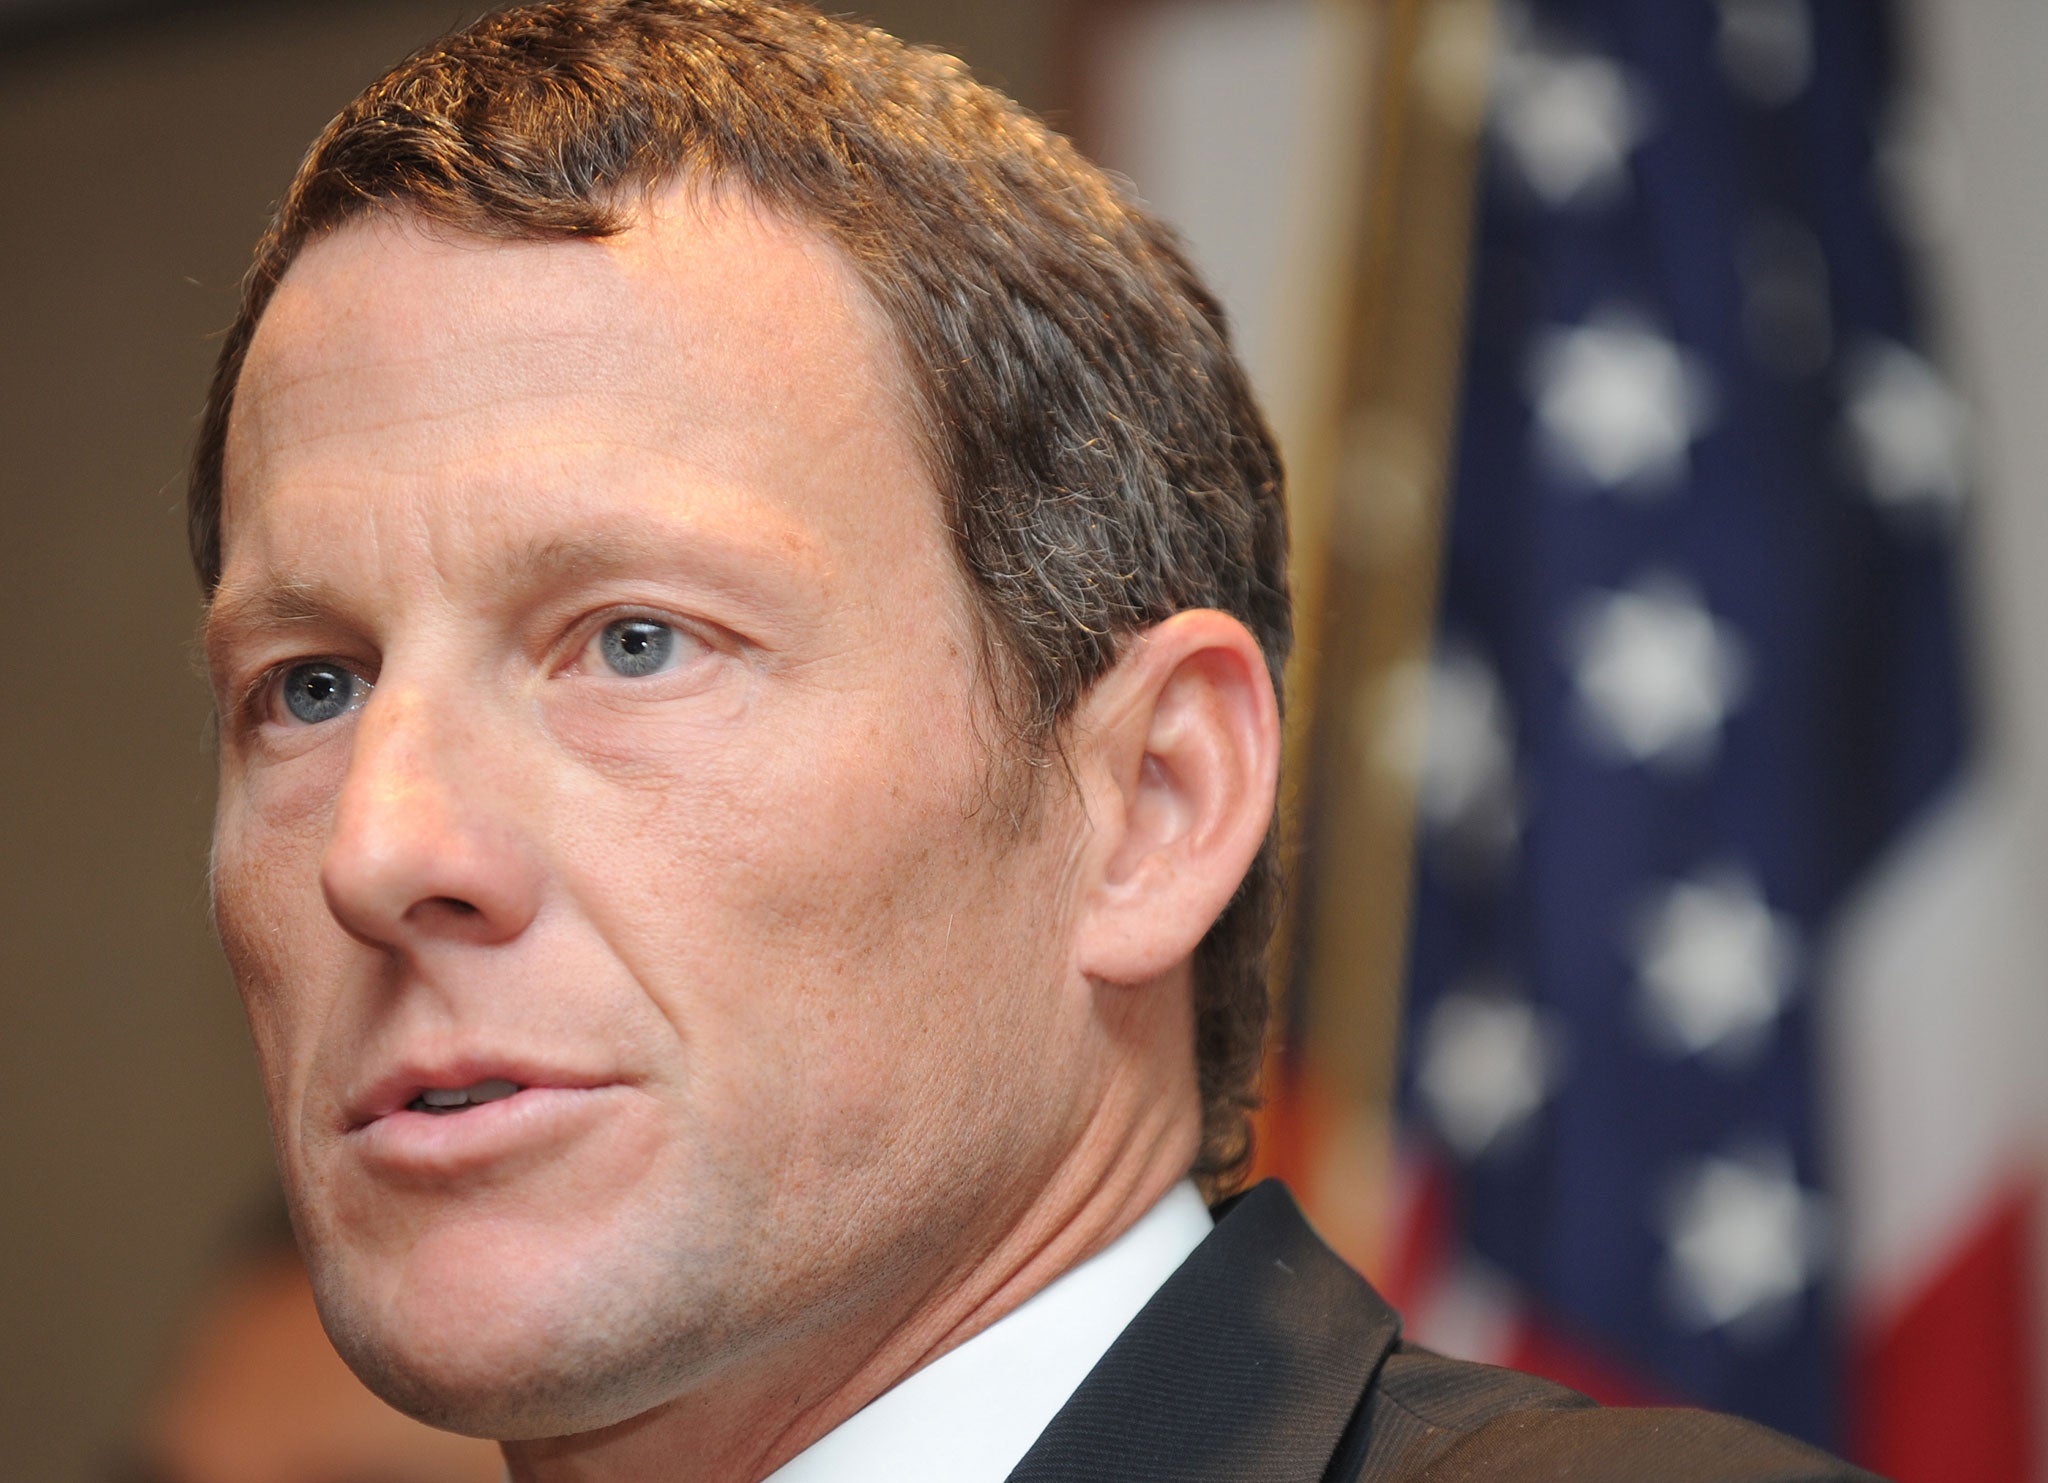 Vindictive: Armstrong comes across as a nasty piece of work